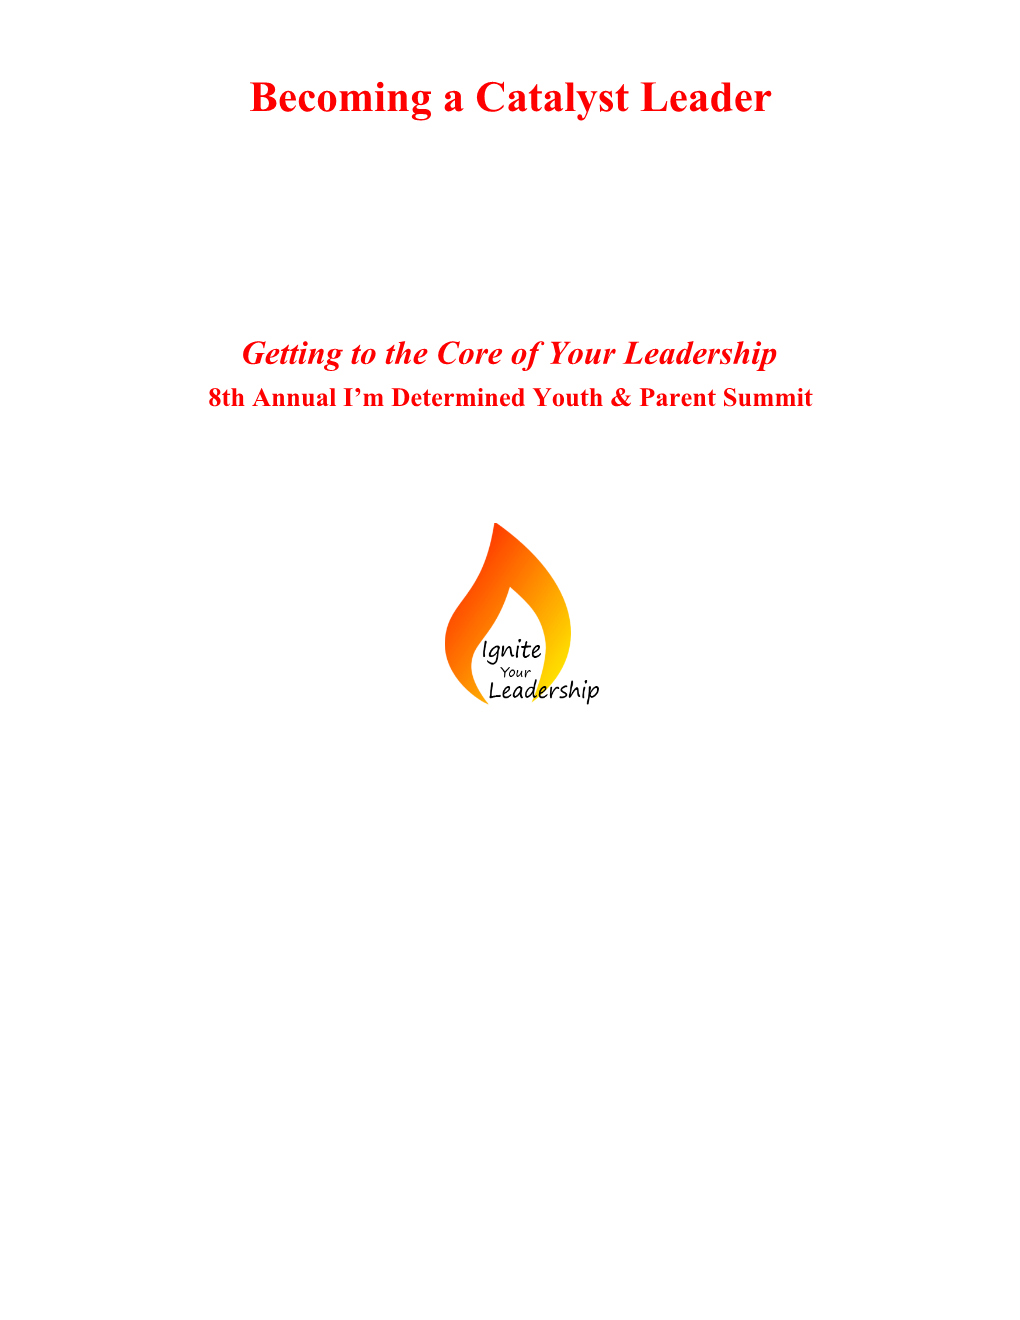 Getting to the Core of Your Leadership